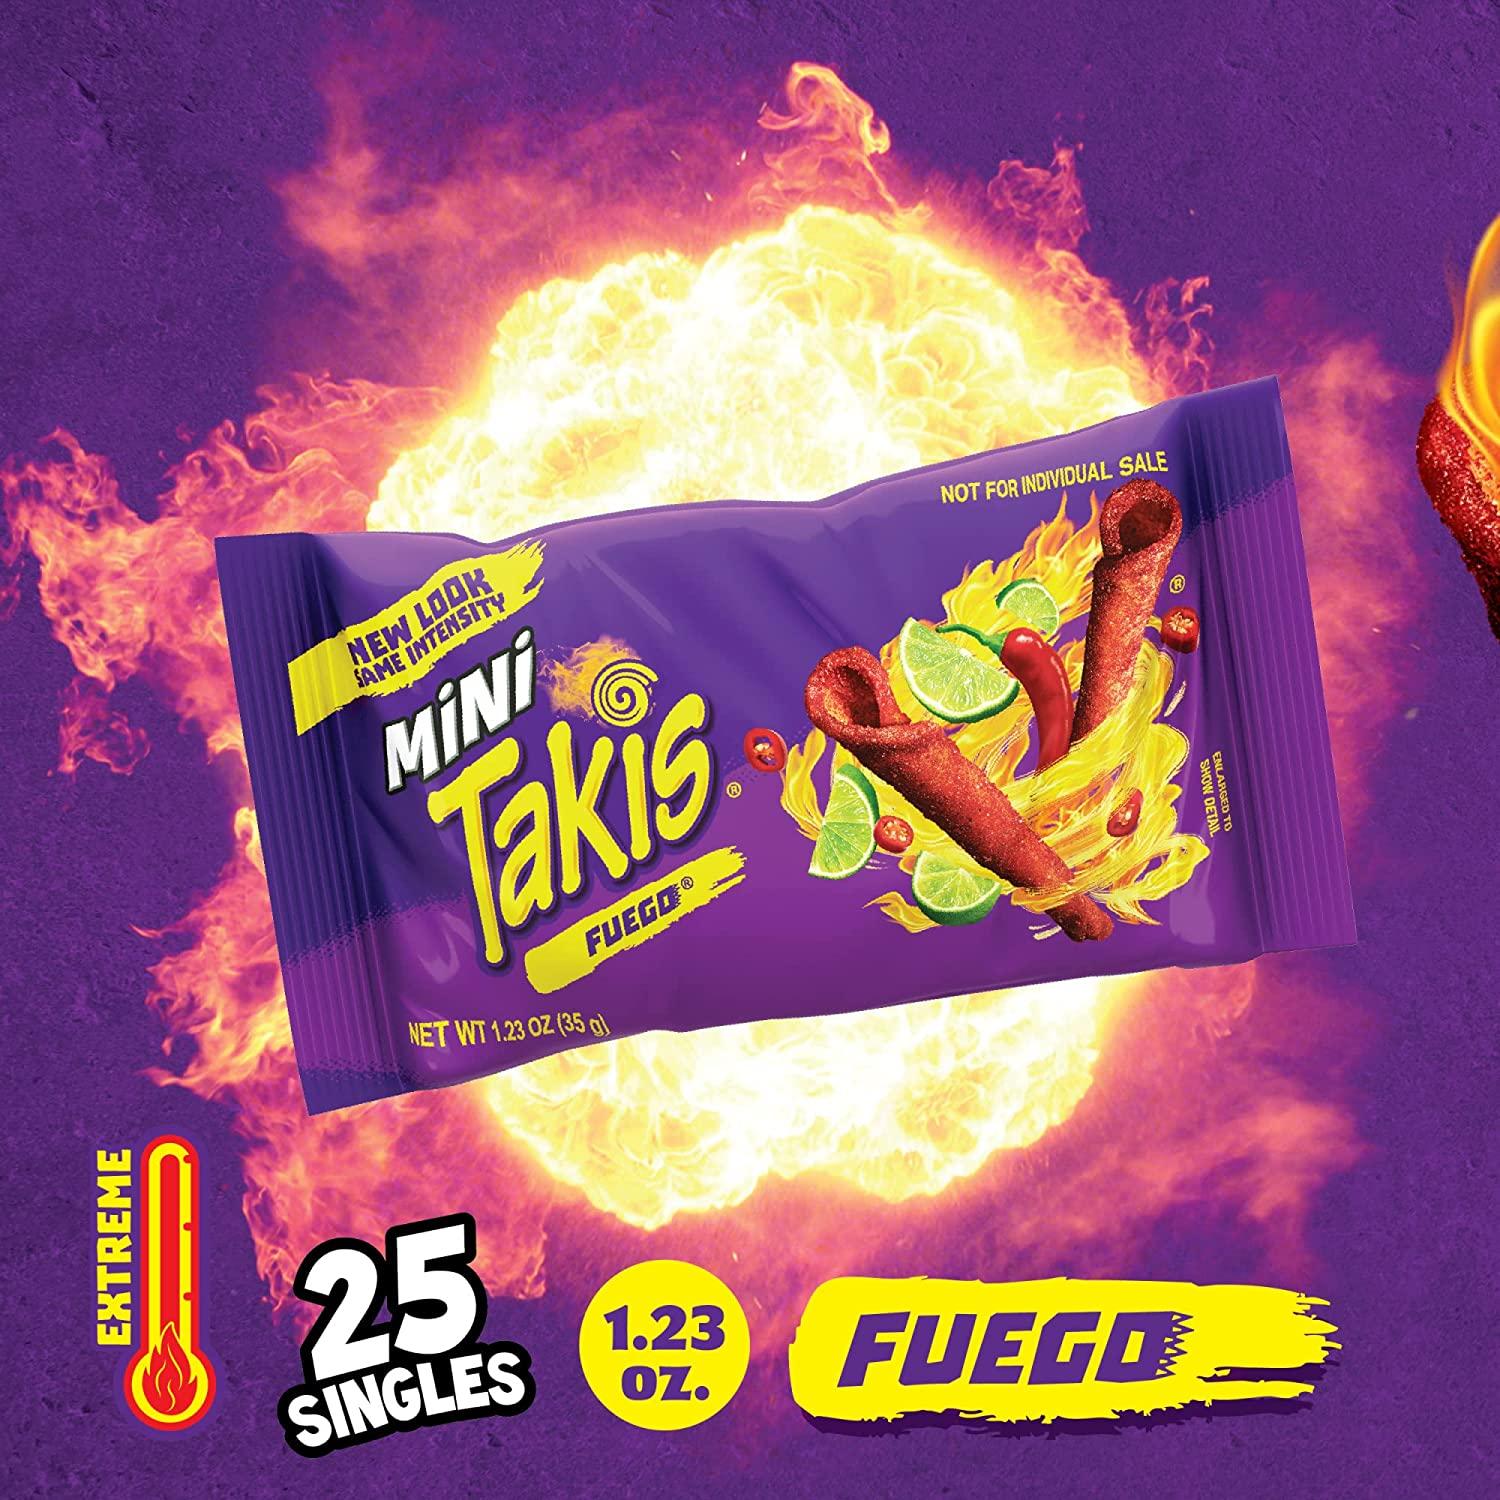 Takis Tortilla Chips, Hot Chili Pepper & Lime, Extreme 4 oz, Tortilla